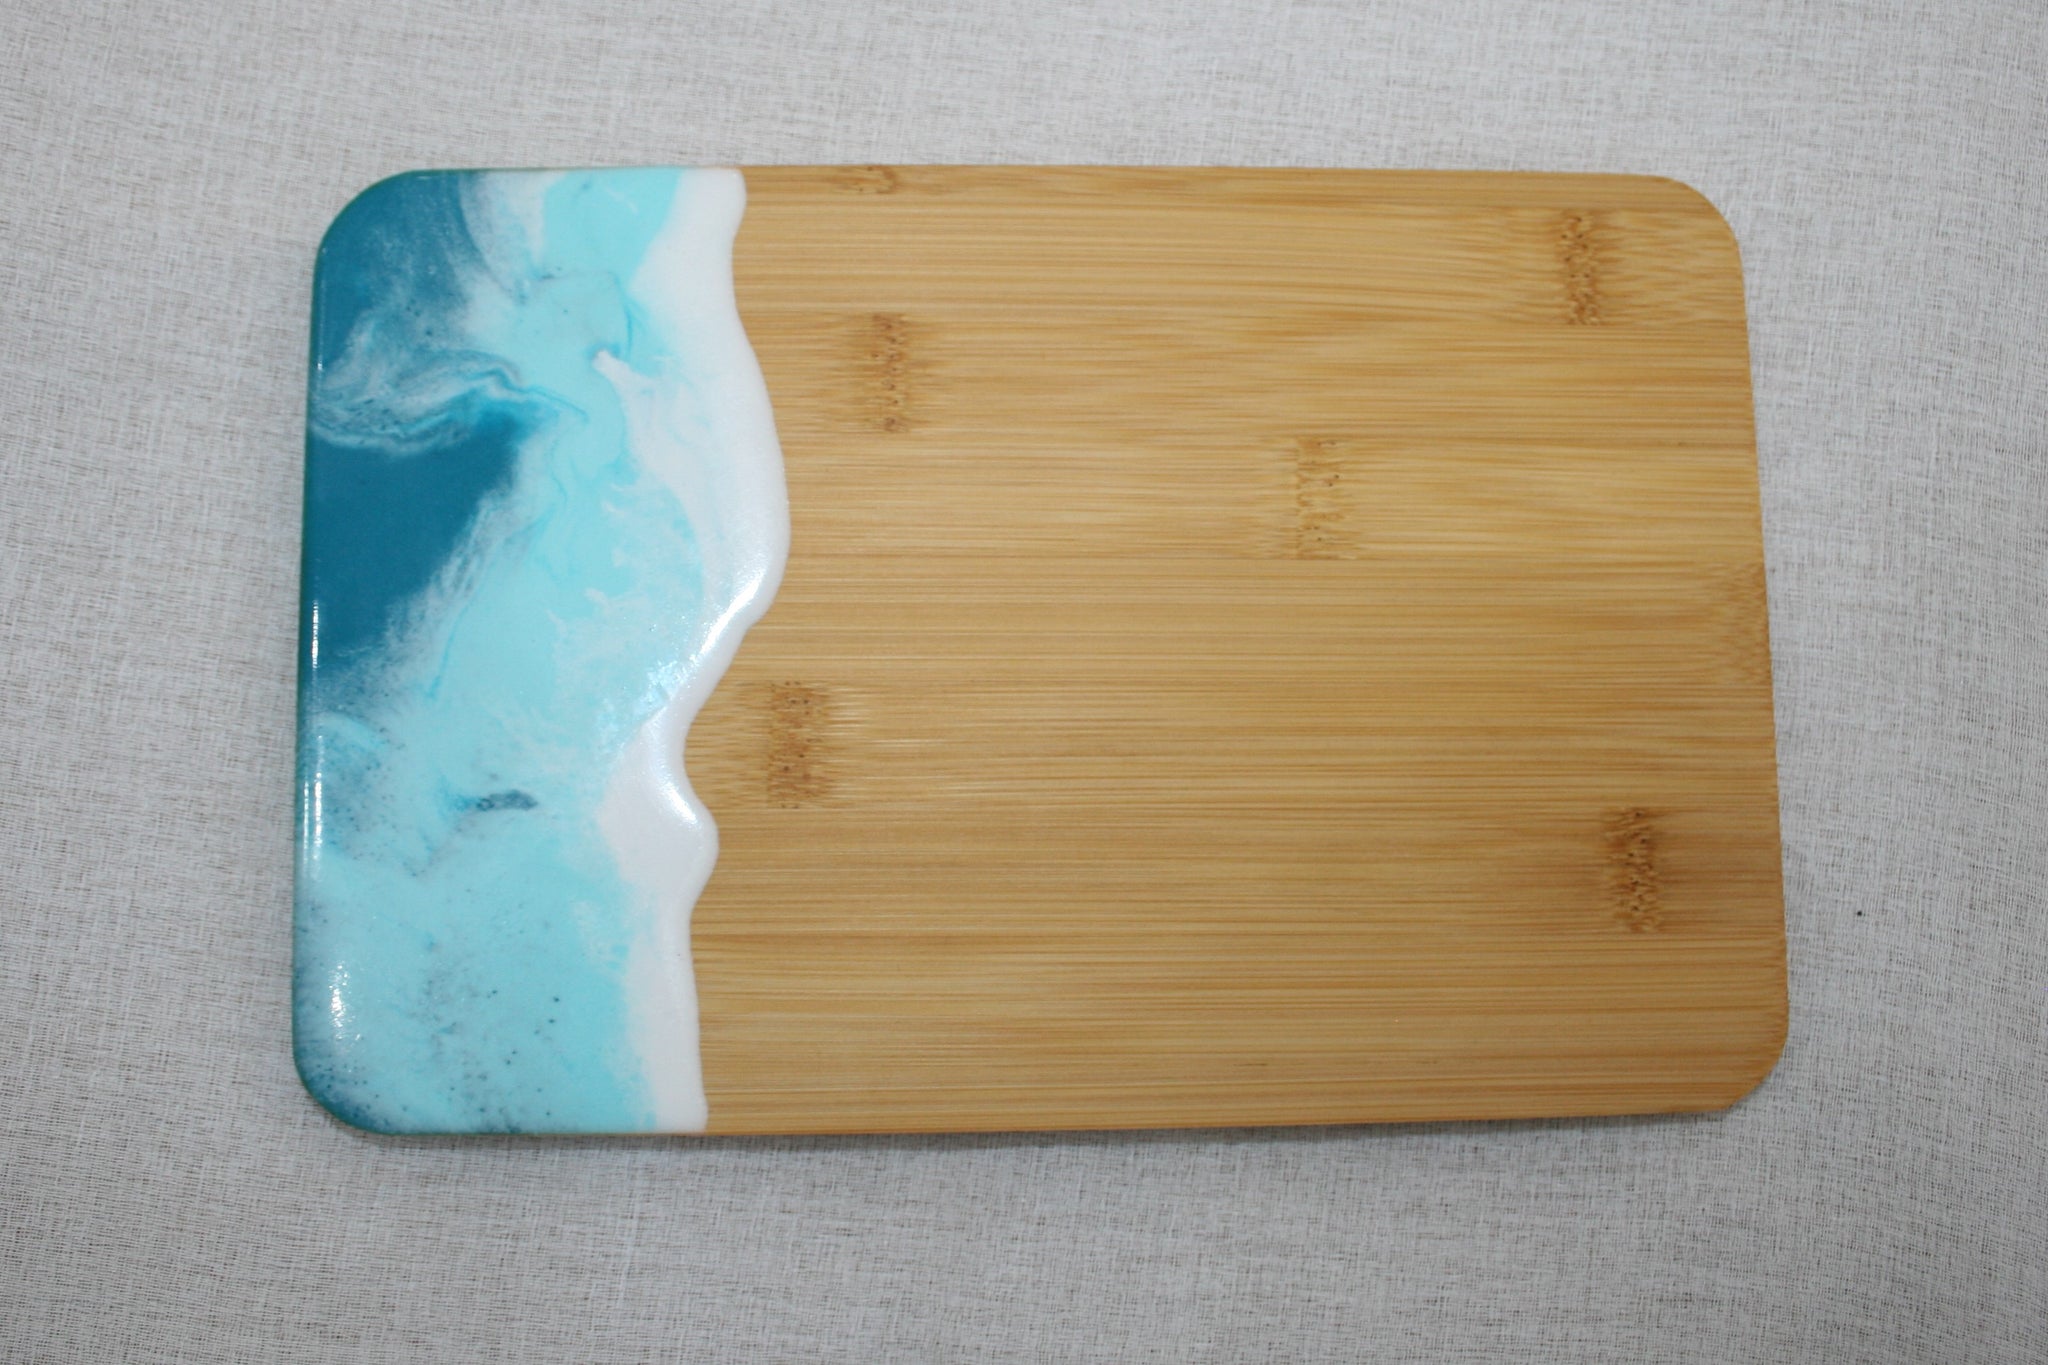 Small Resin Cheese Board - Teal